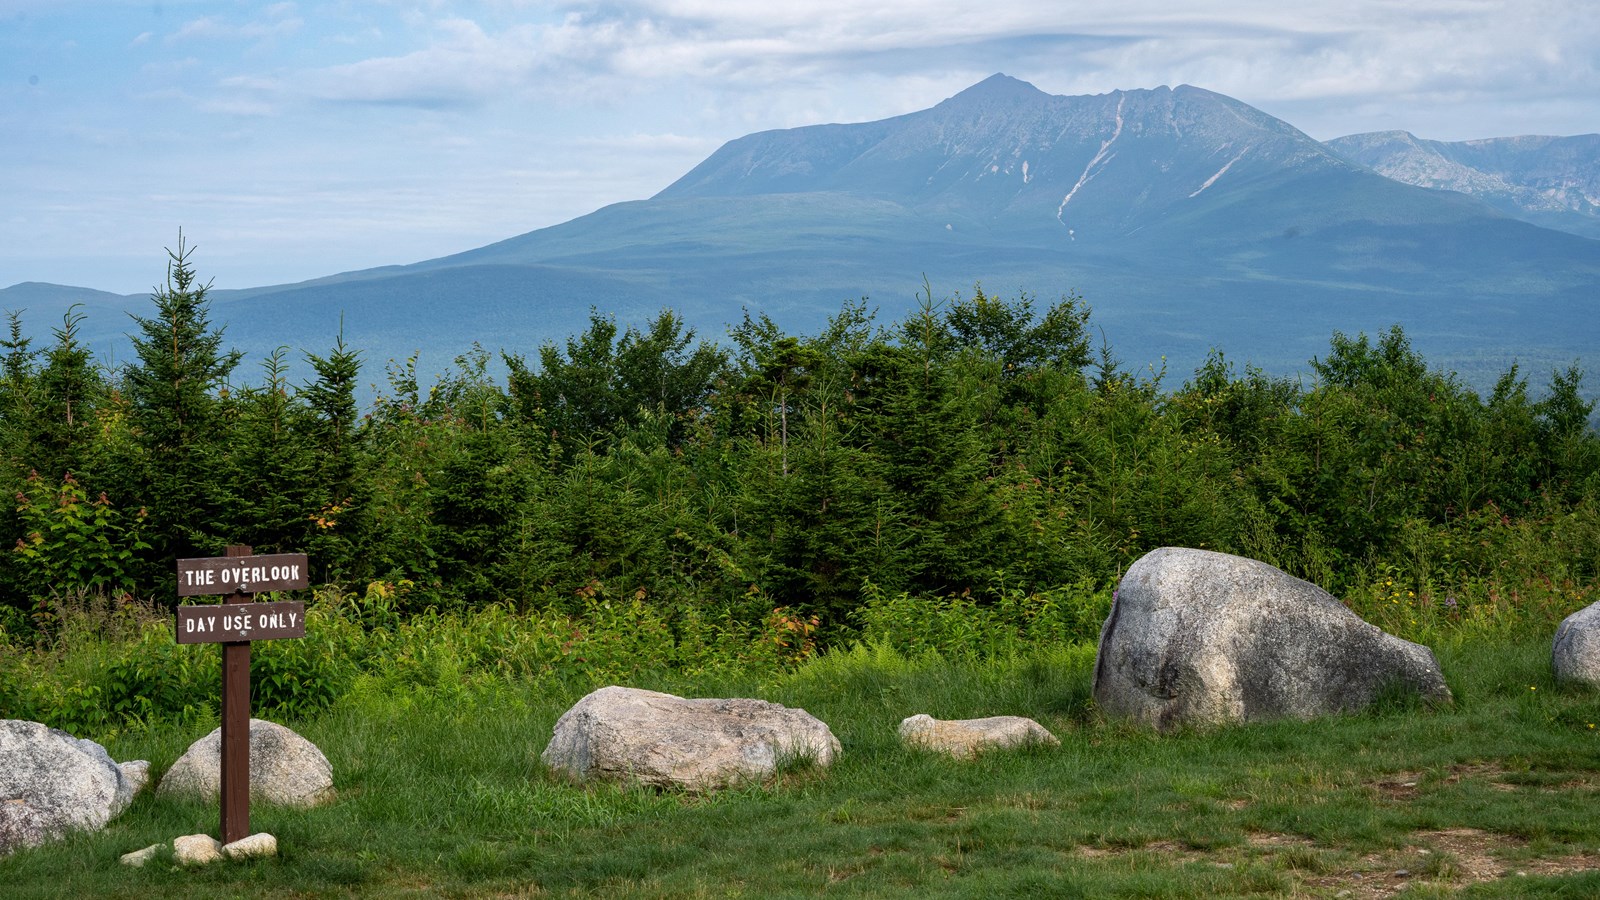 A green mountain peak rises above the treetops. In the foreground are boulders and grass.